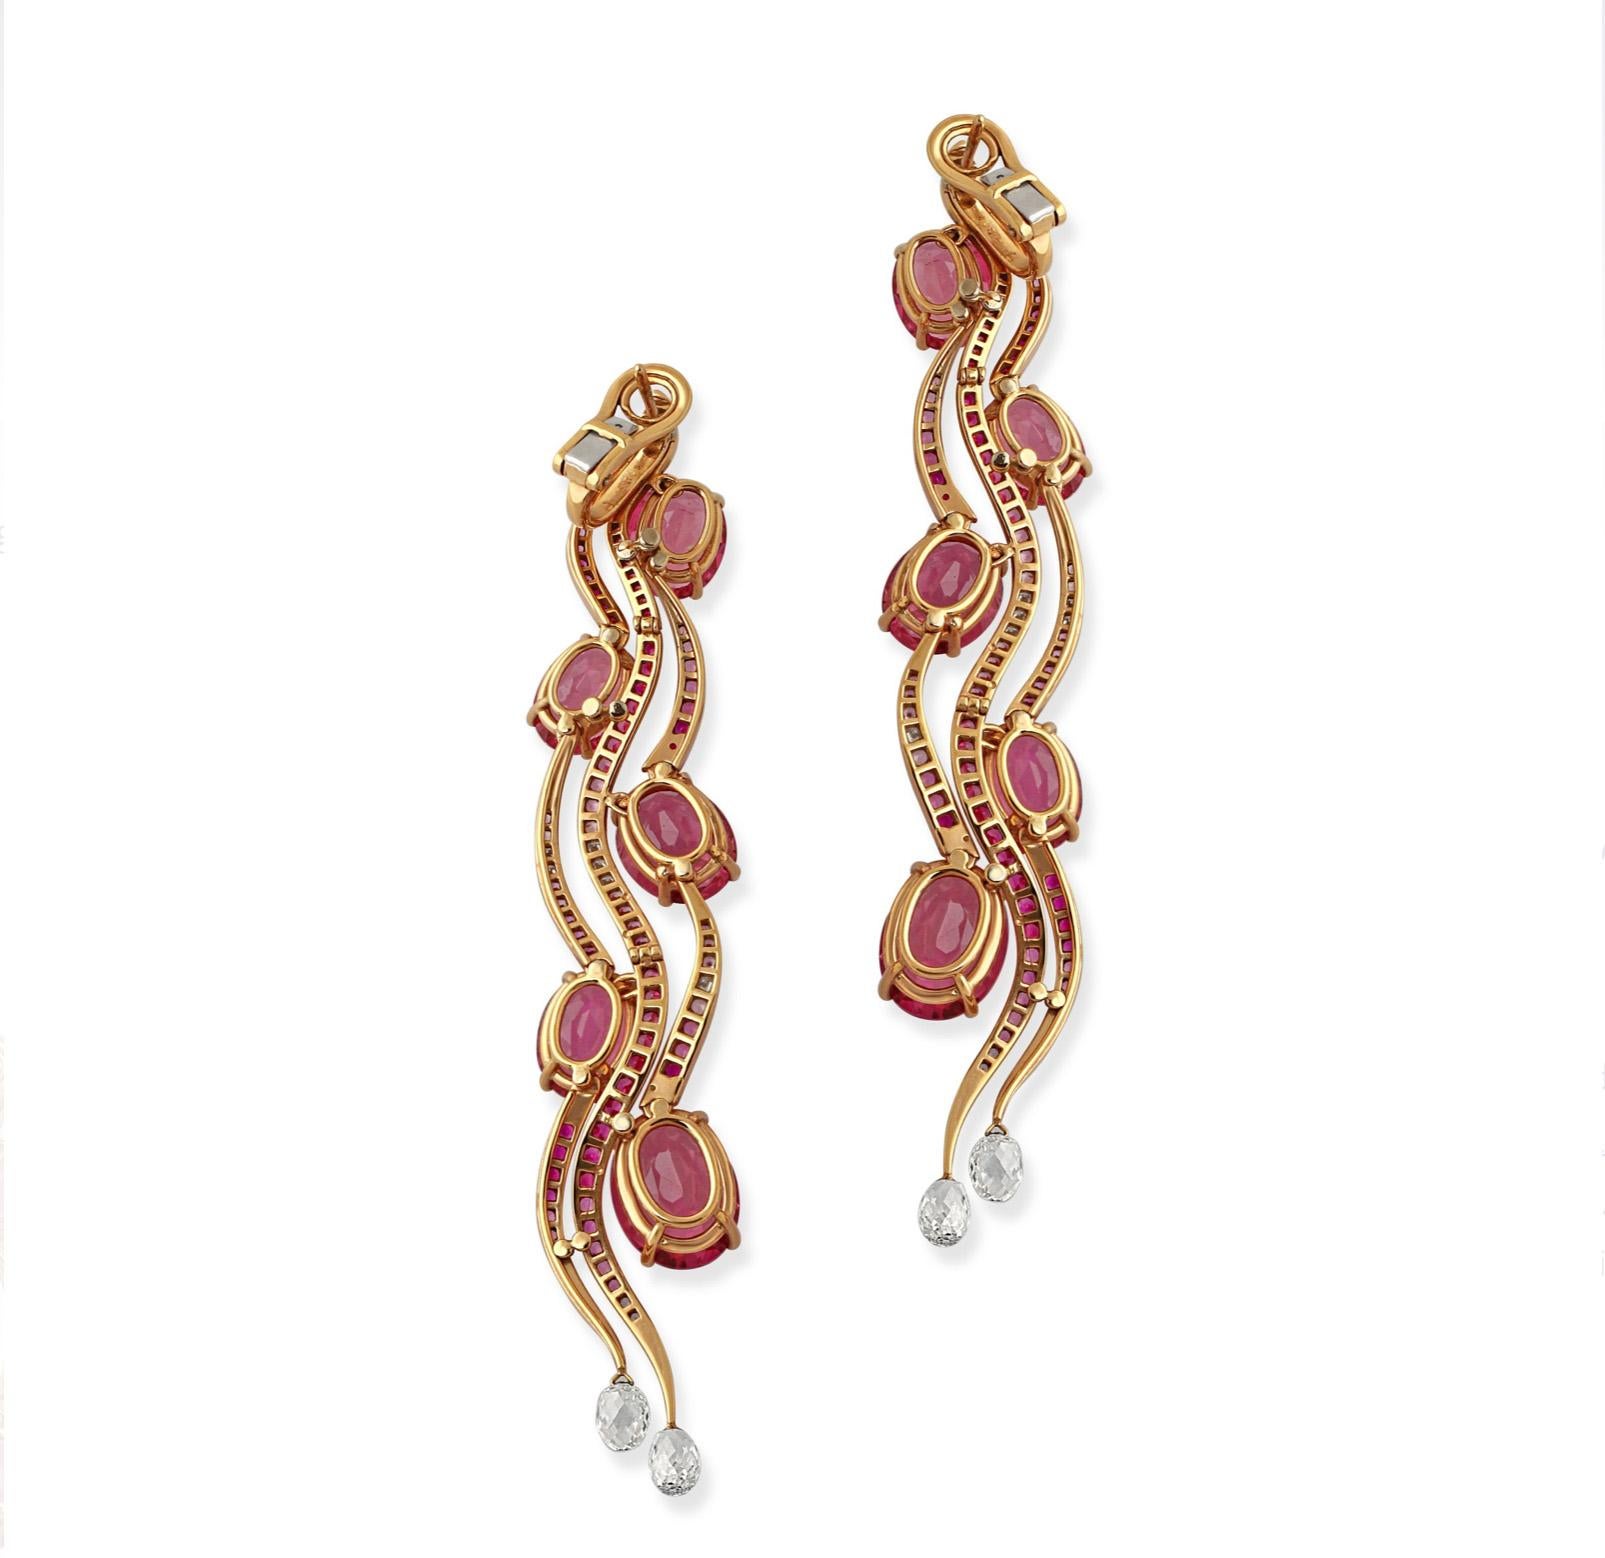 A pair of 18k yellow gold pink tourmaline and diamond earrings by Chopard. A beautifully designed statement piece created by Chopard for the Red Carpet collection that launches each year alongside the Cannes Film Festival. These earrings are set